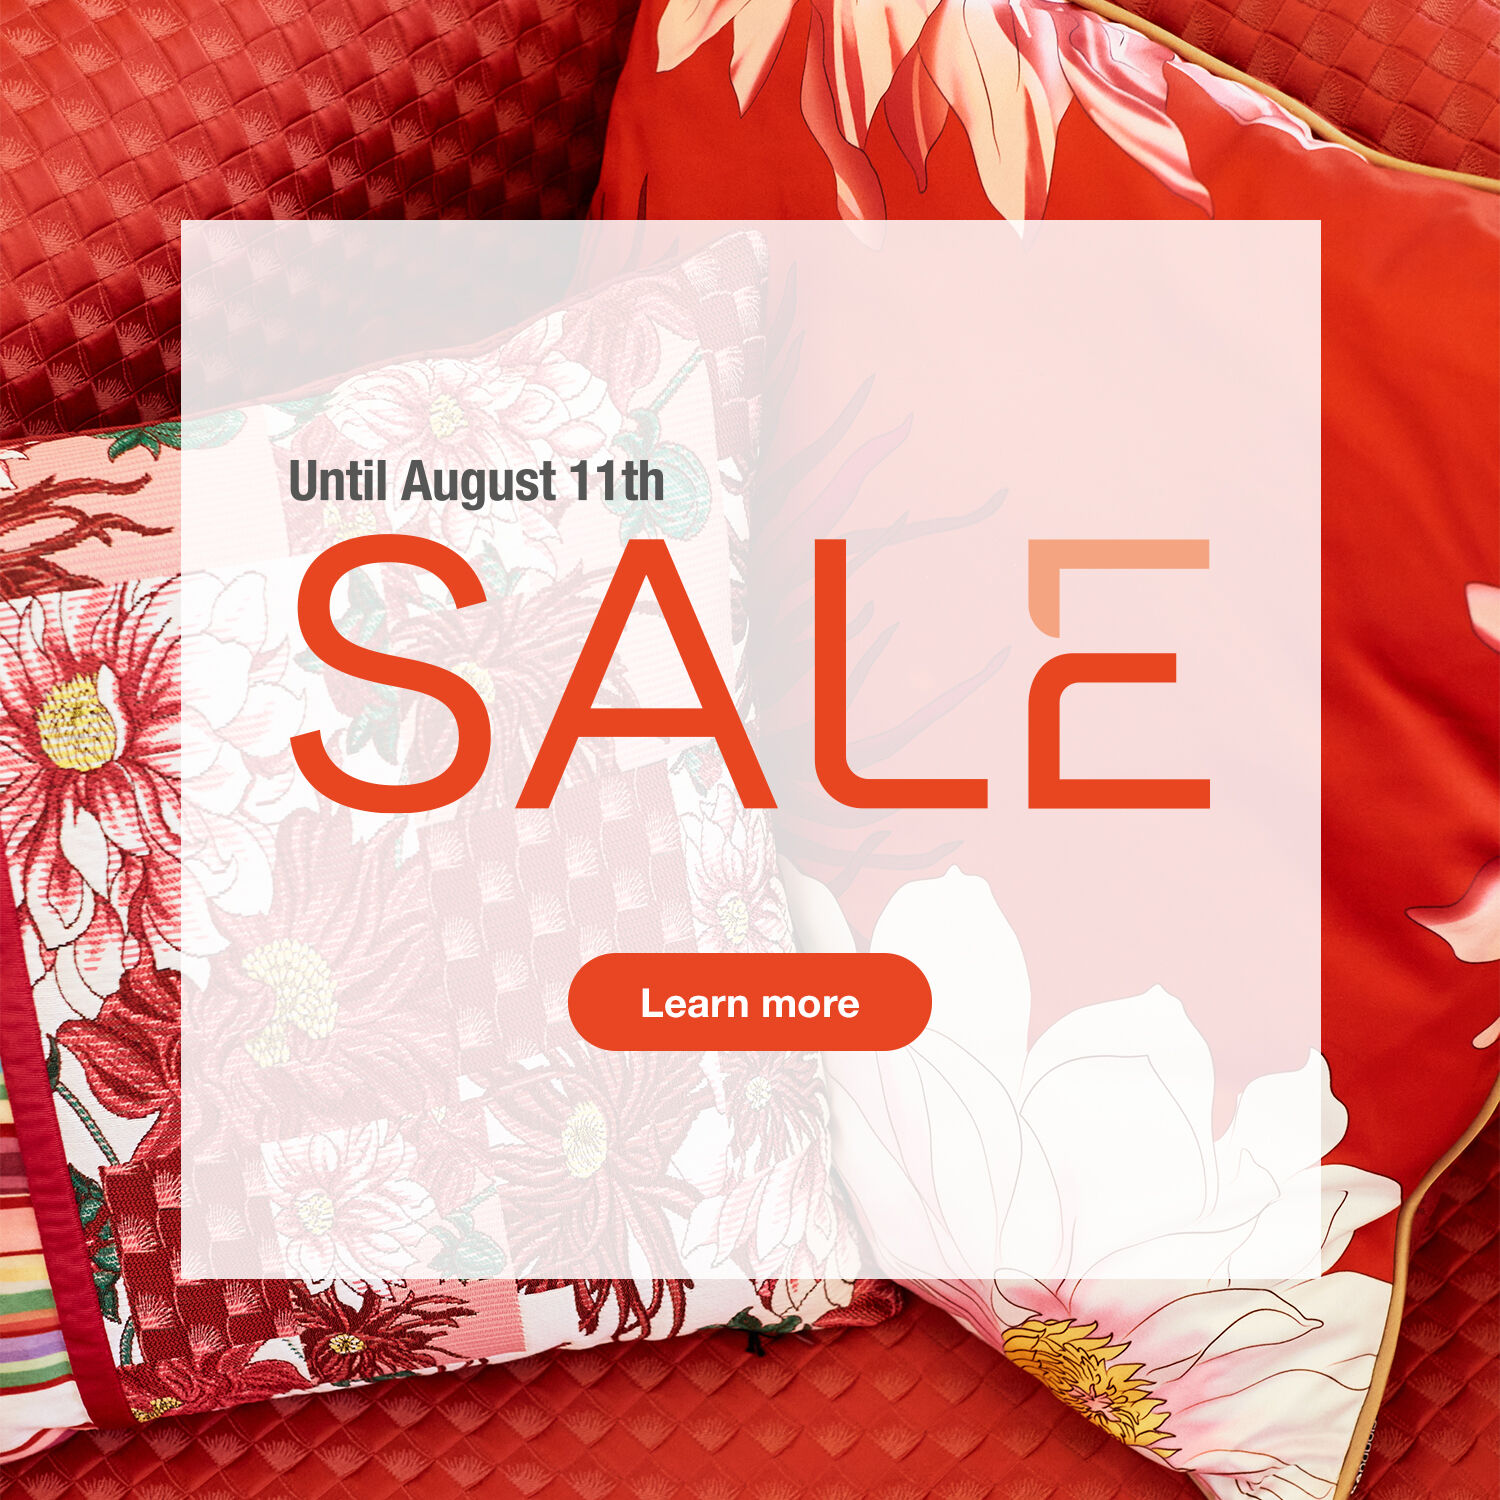 The Summer sale, until August 11th